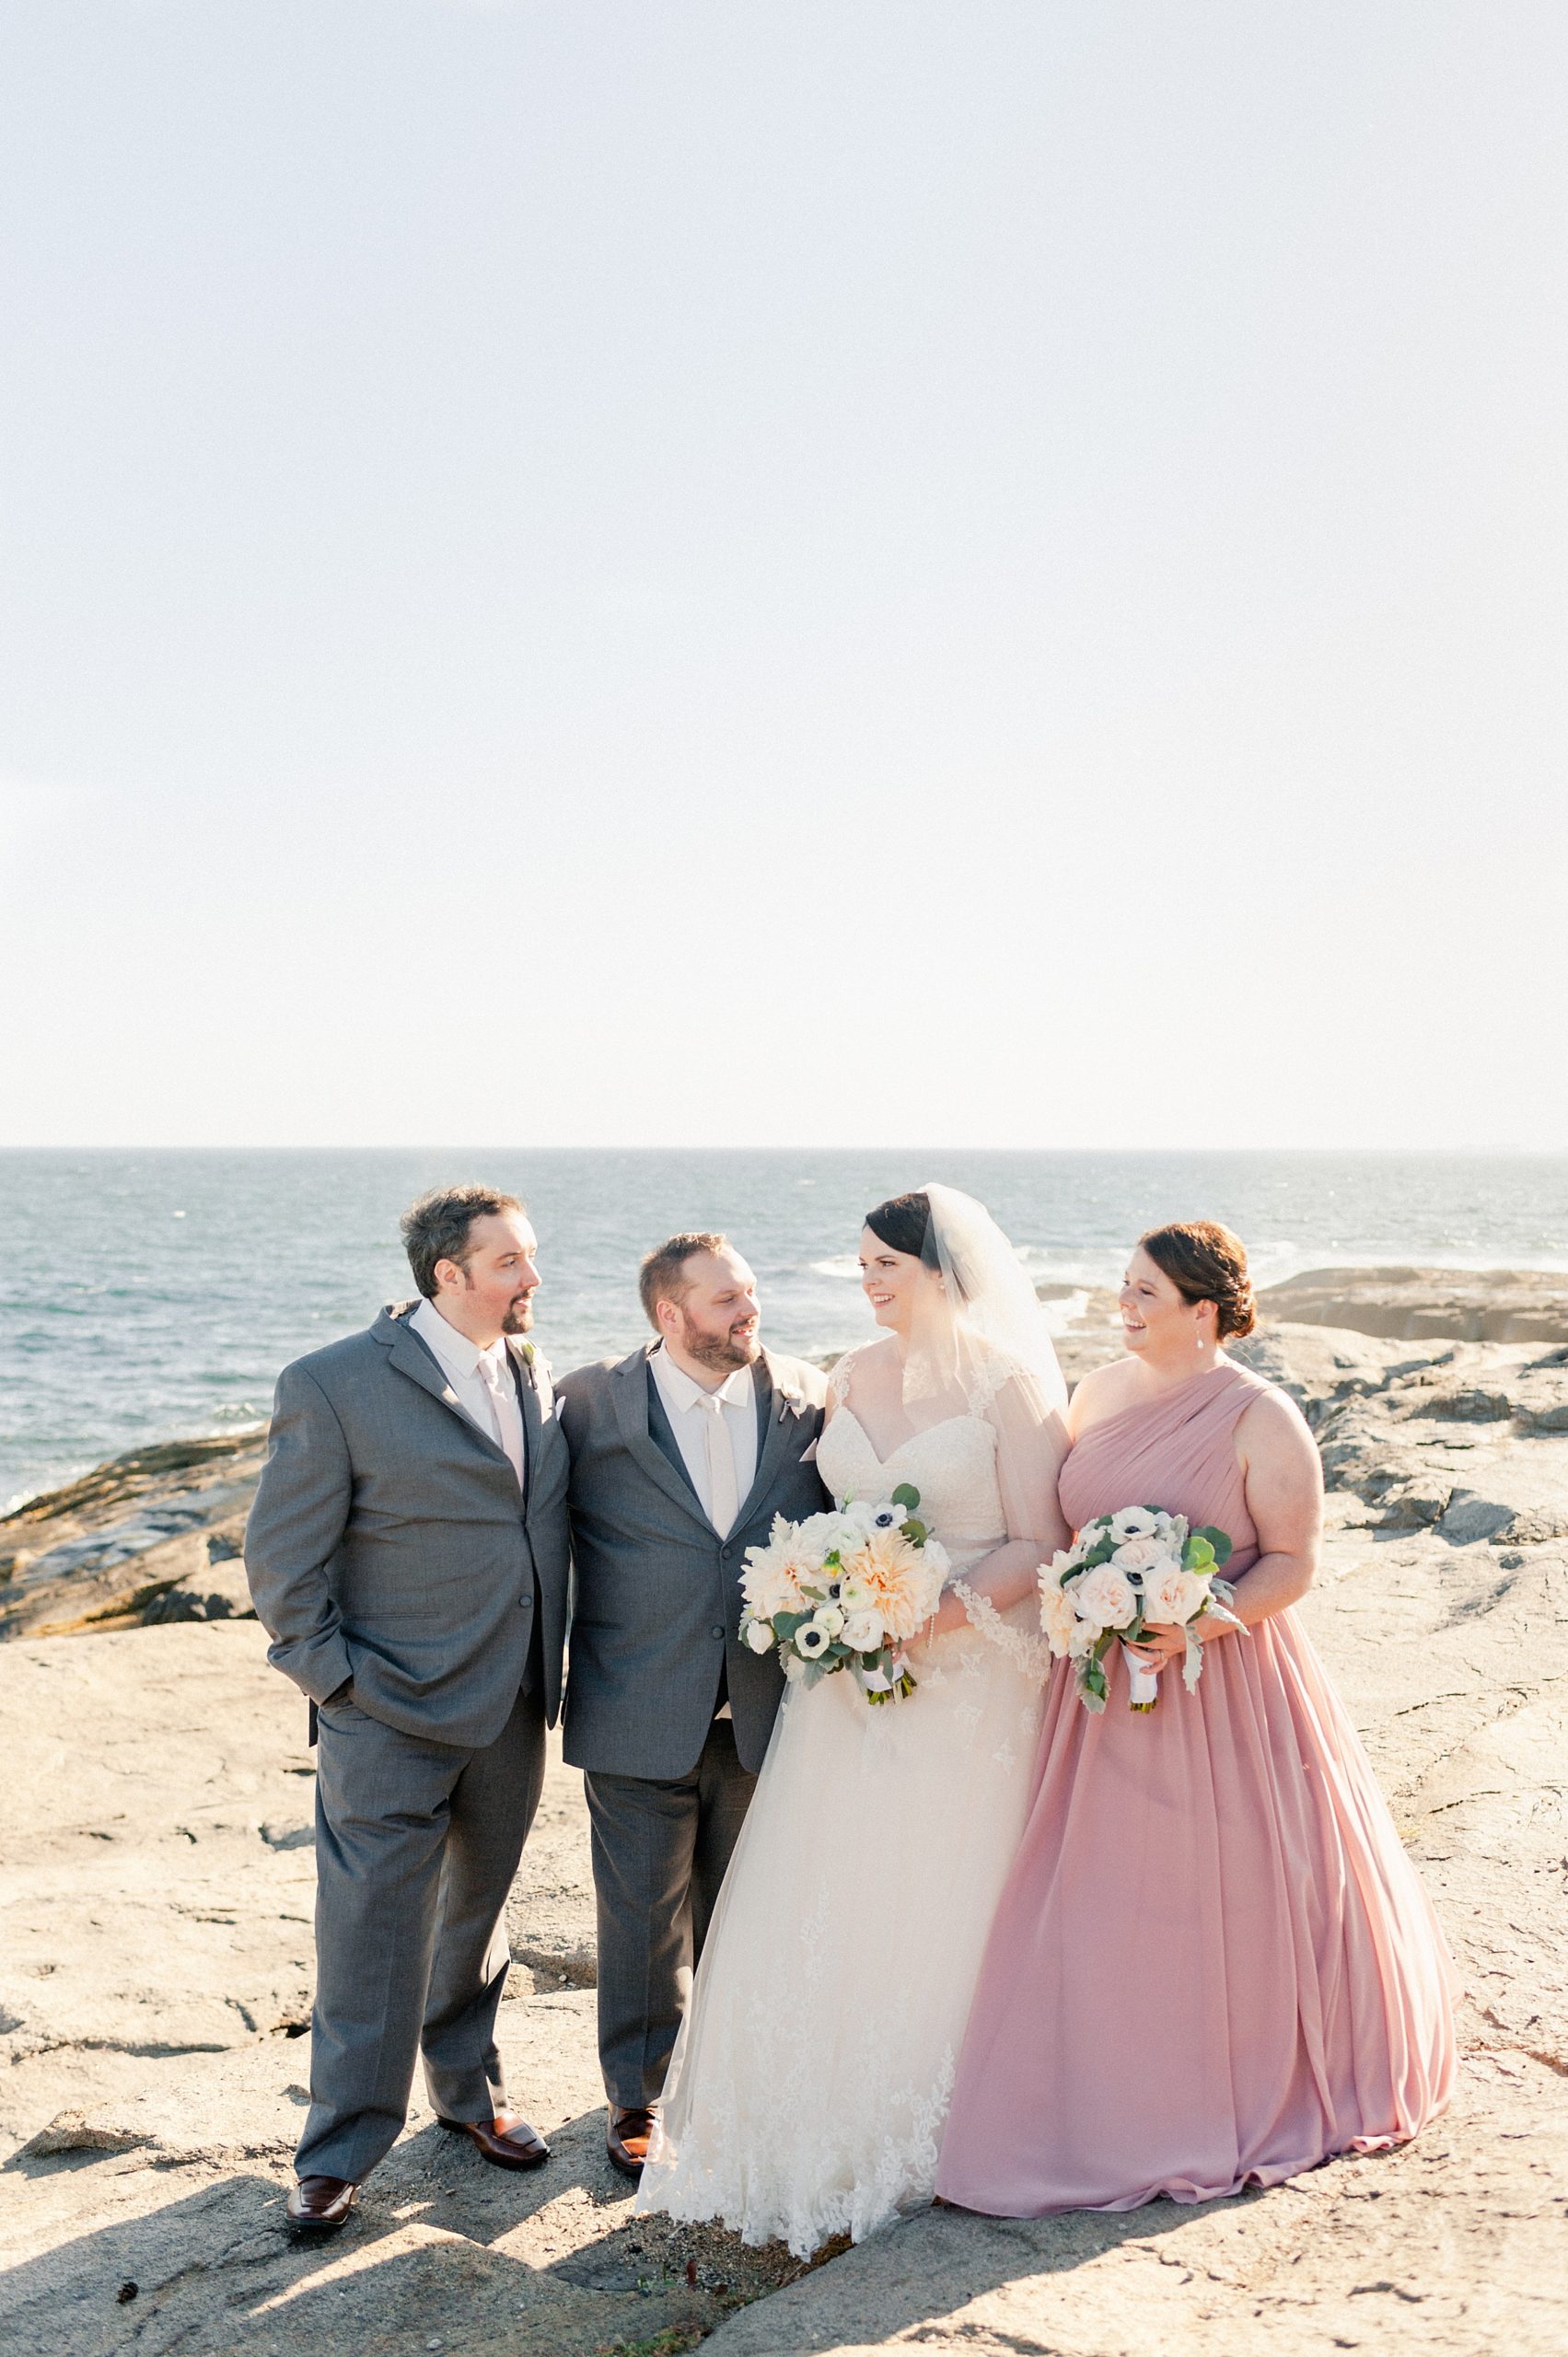 bridal party portraits at nubble lighthouse for york harbor inn wedding in maine